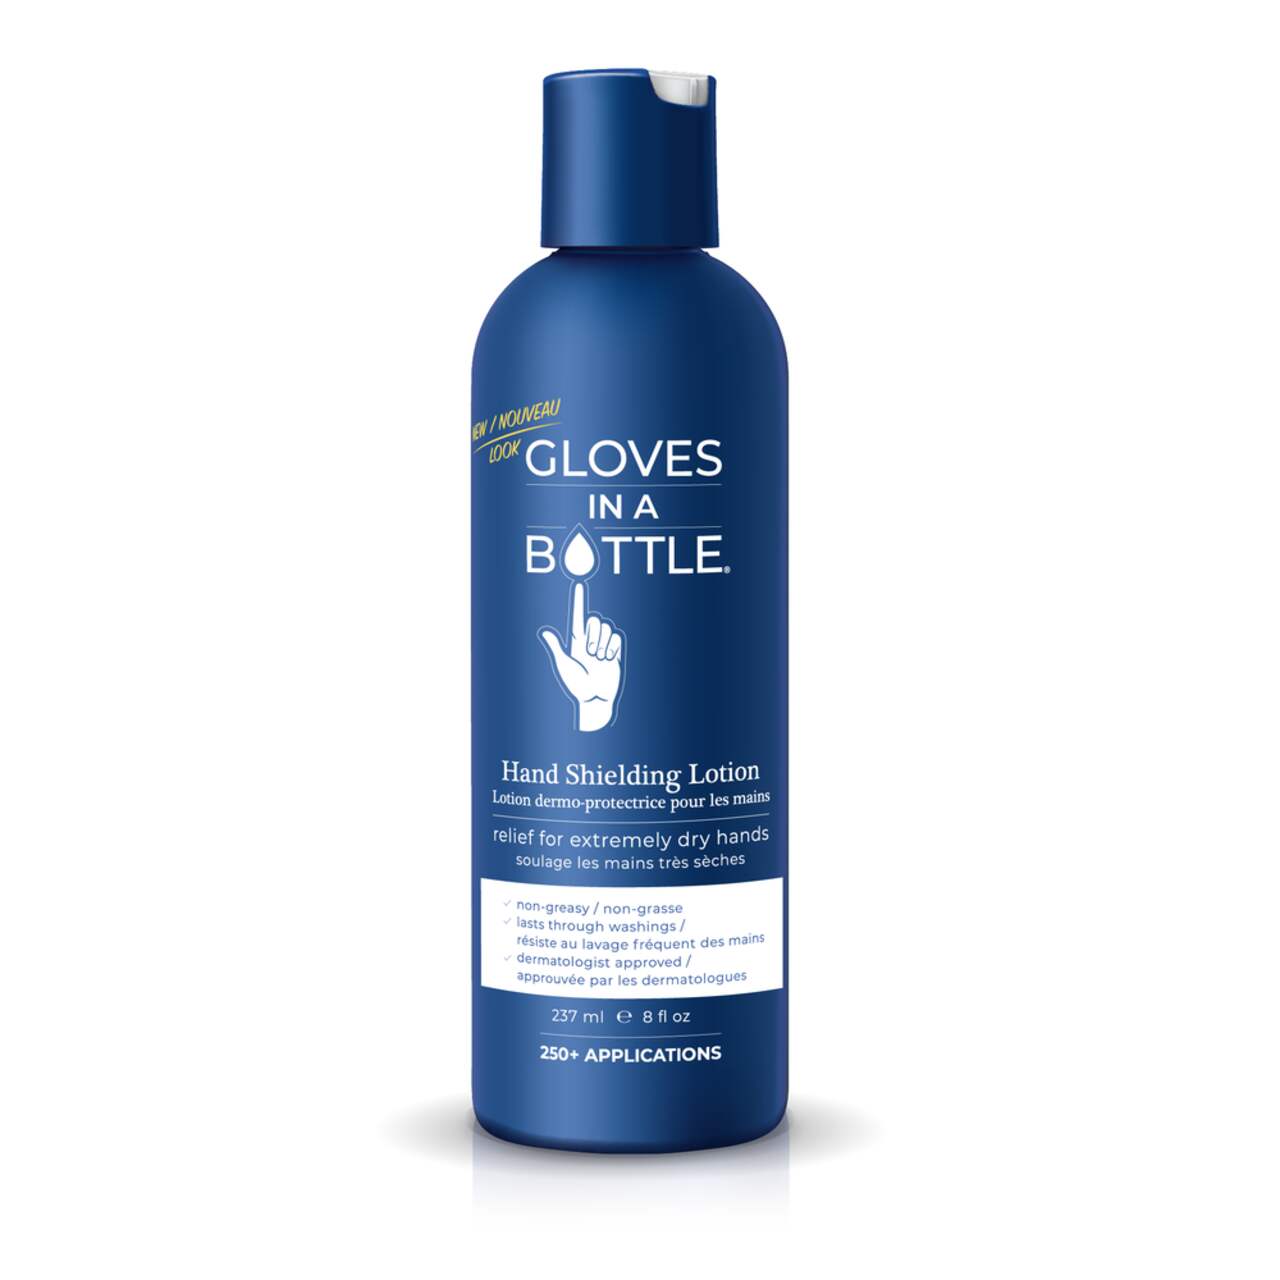 Gloves In A Bottle Cream Hand Shielding Lotion, Unscented, 237-mL